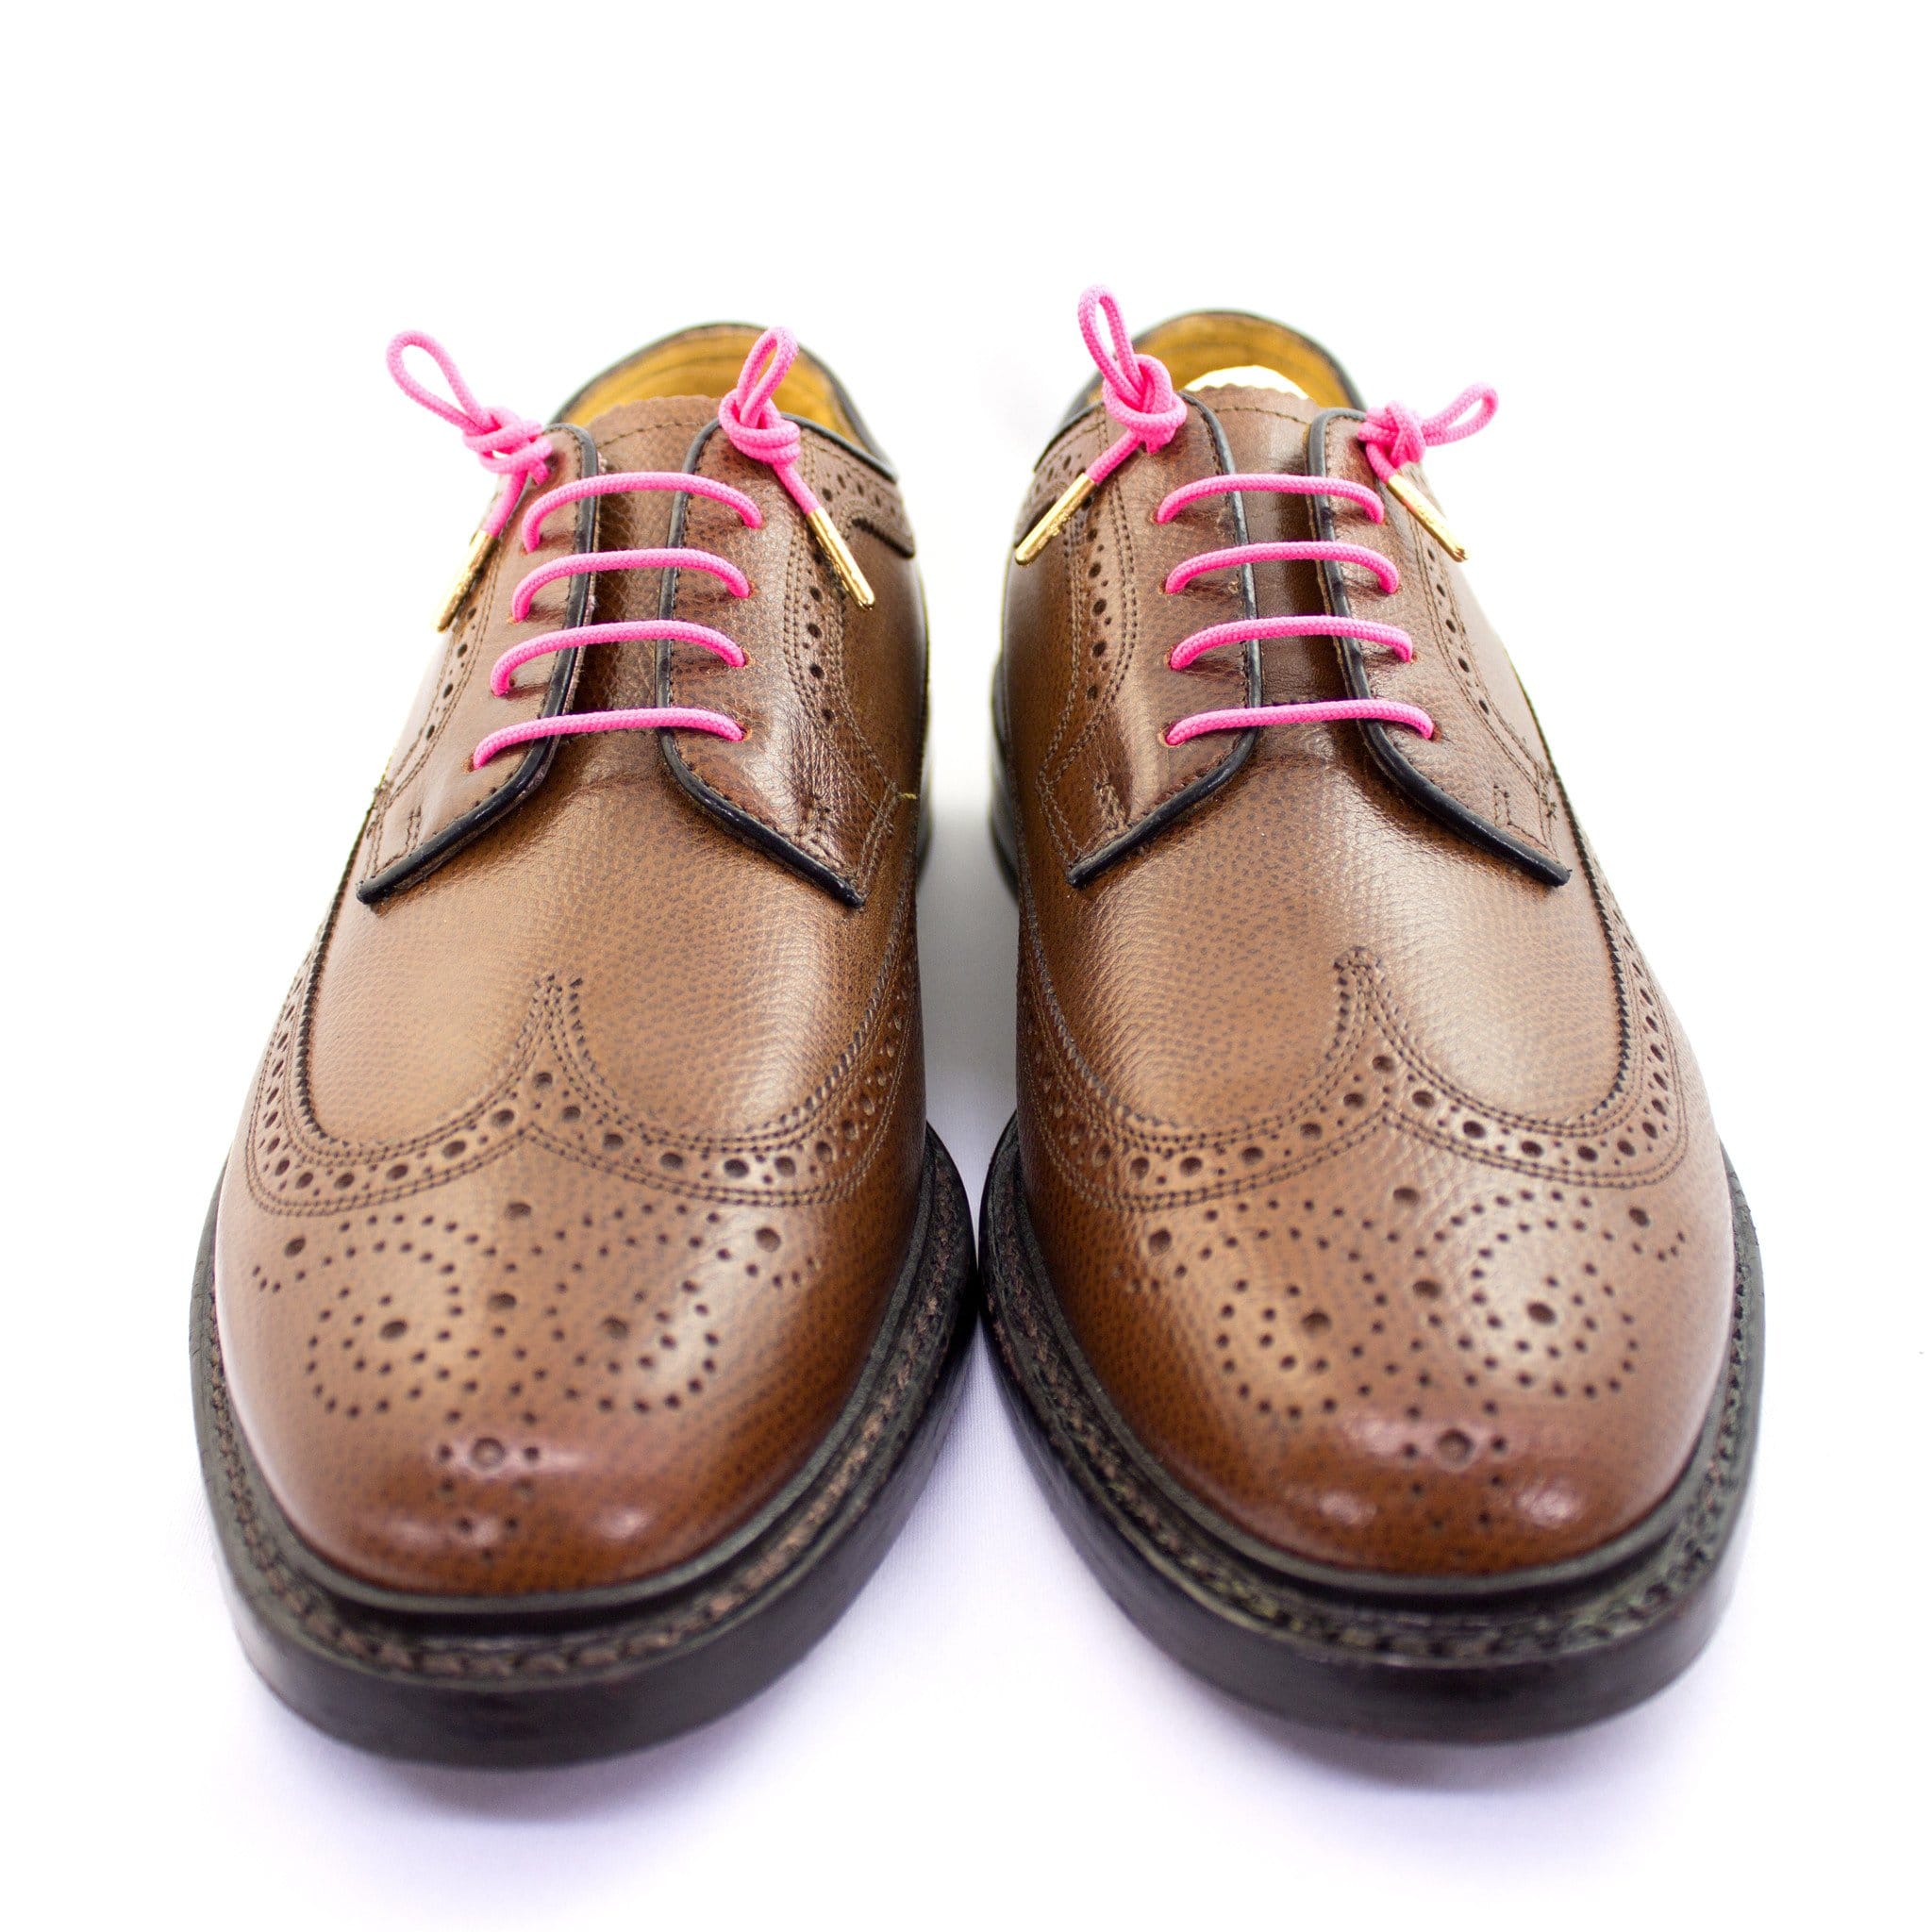 tan shoes with pink shoelaces